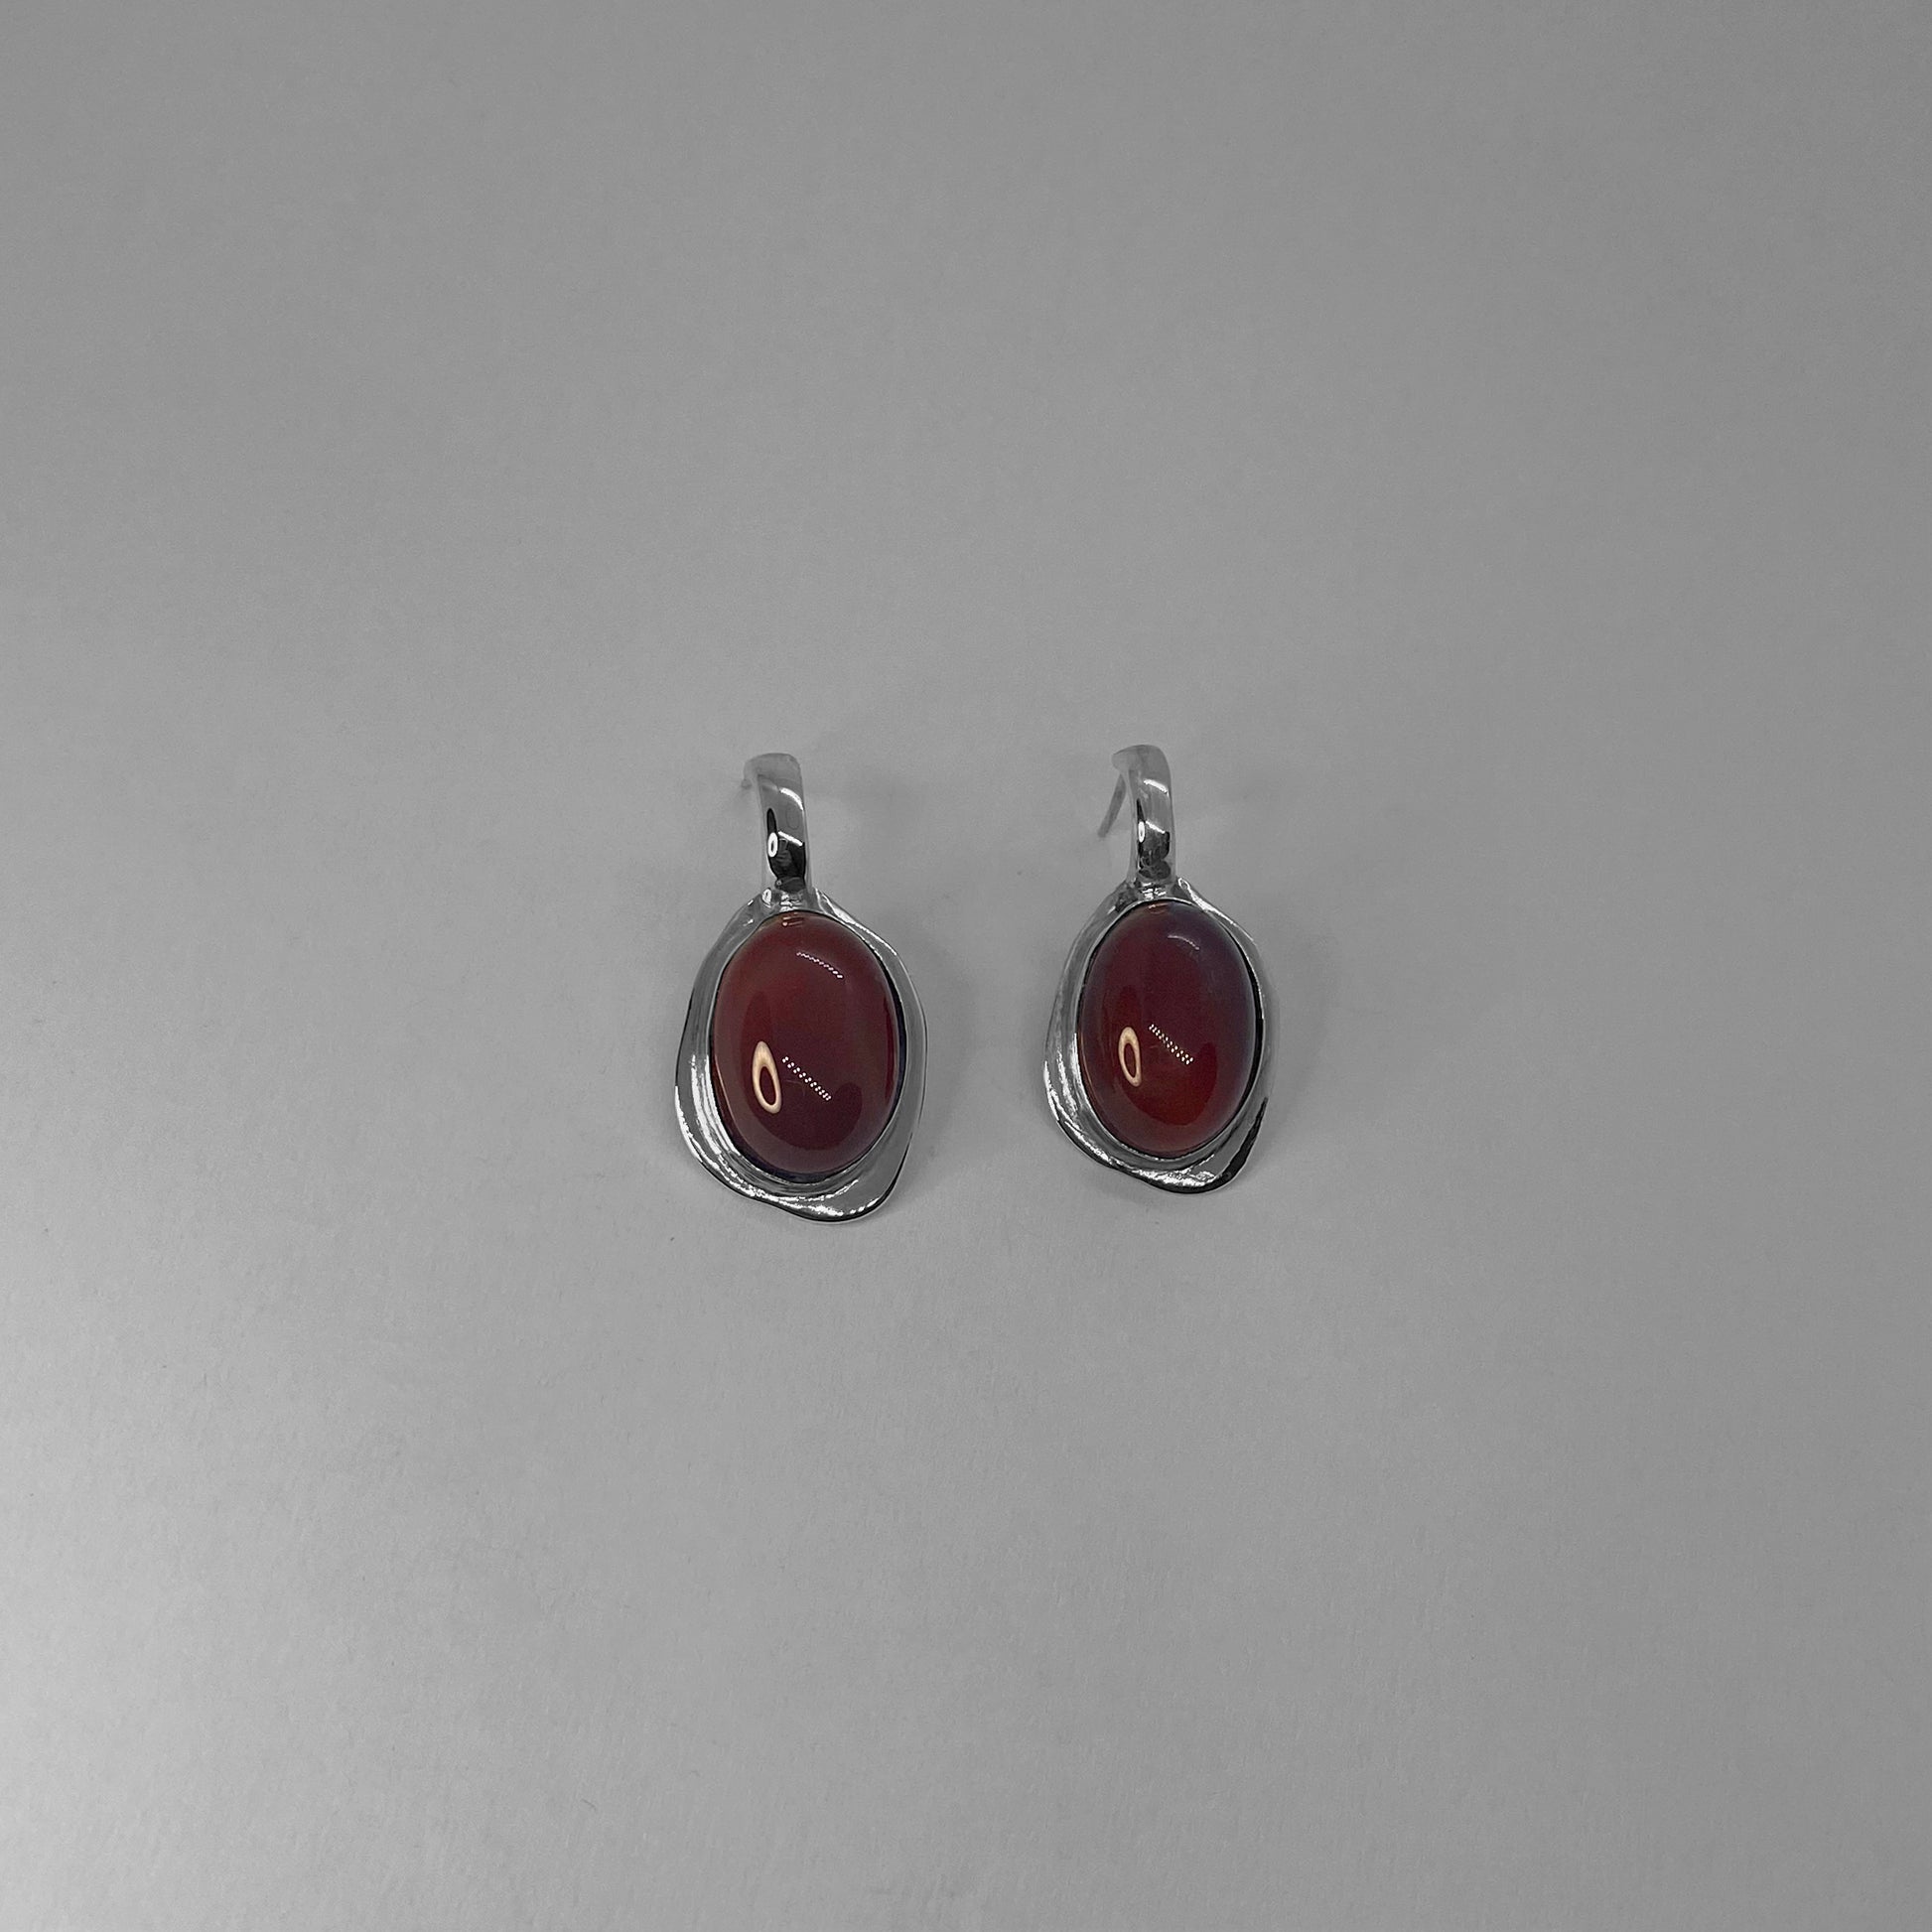 Galene earrings are handmade and made of 925 silver. They are smooth and shiny. The stone featured in the earrings is a semi-precious gemstone. There are two color options: red (carnelian) and black (agate).